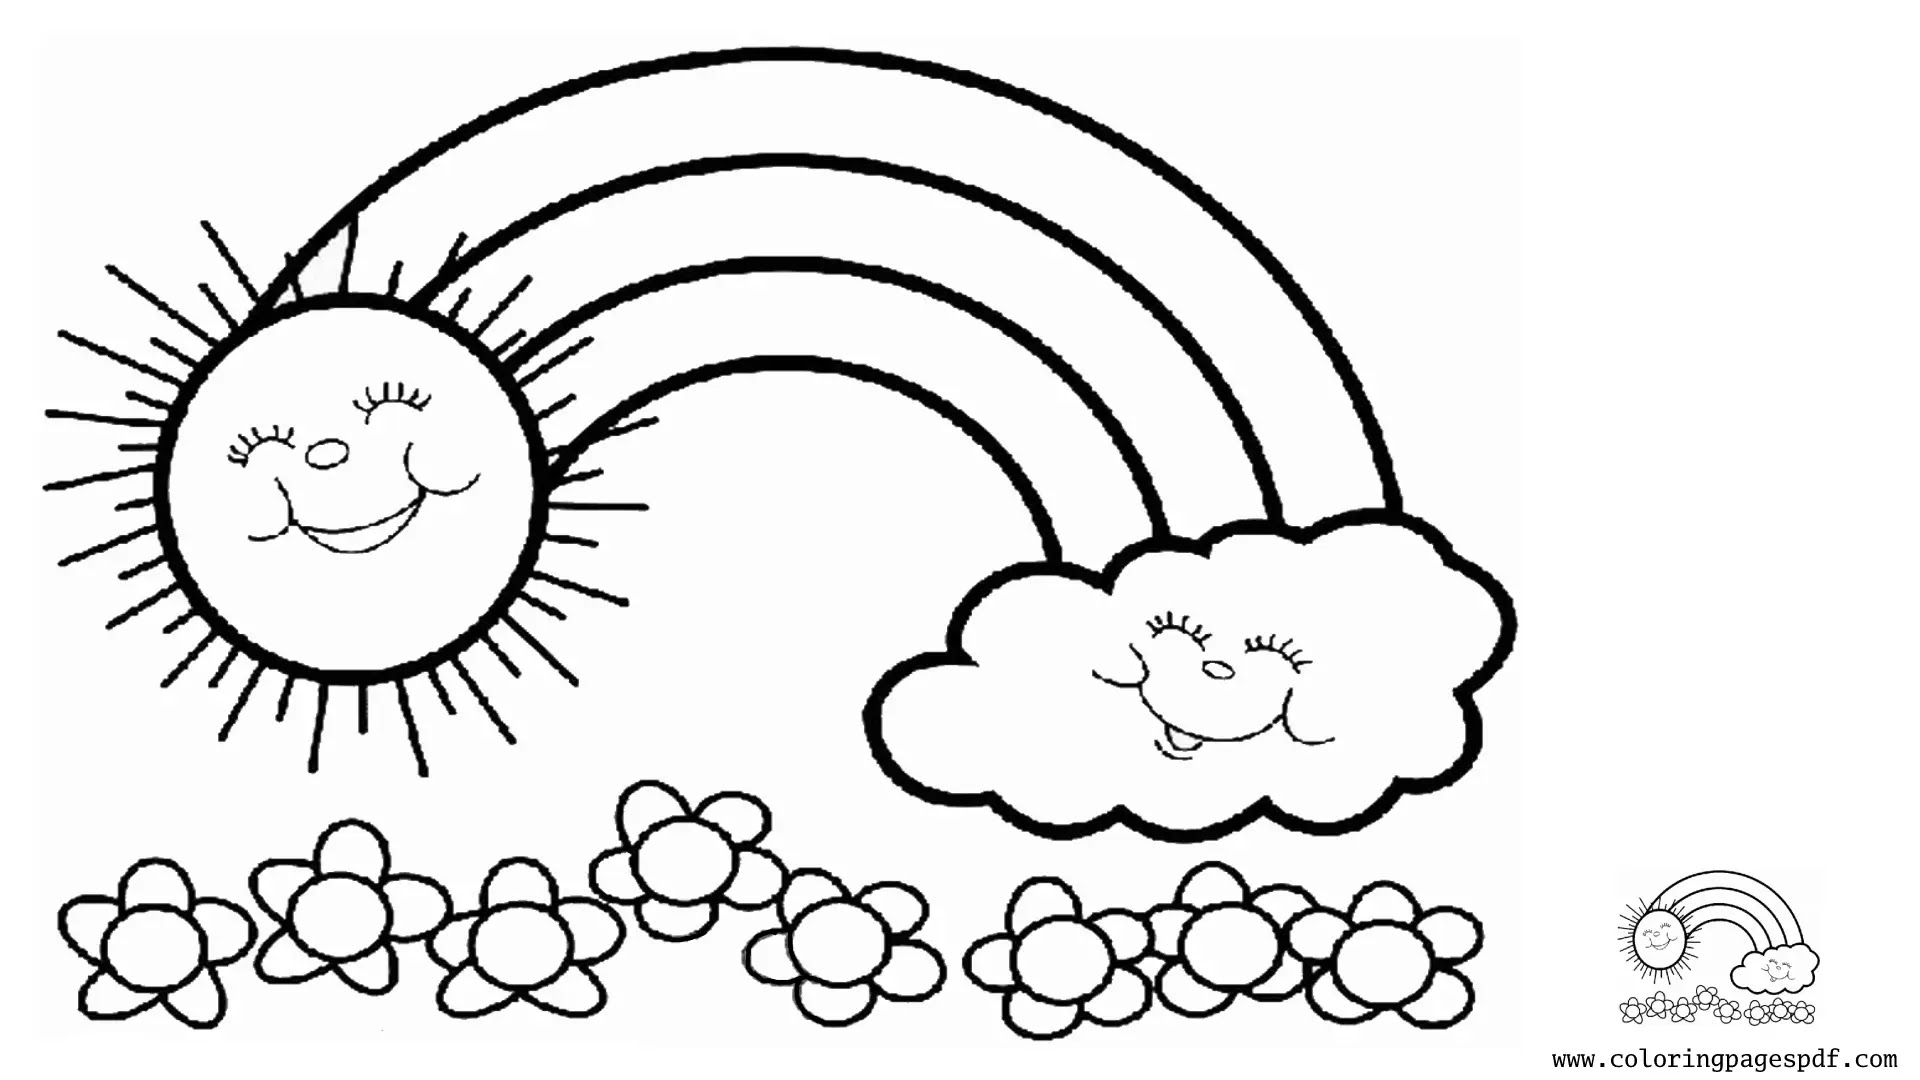 Coloring Pages Of A Rainbow Between Smiling Sun And Cloud